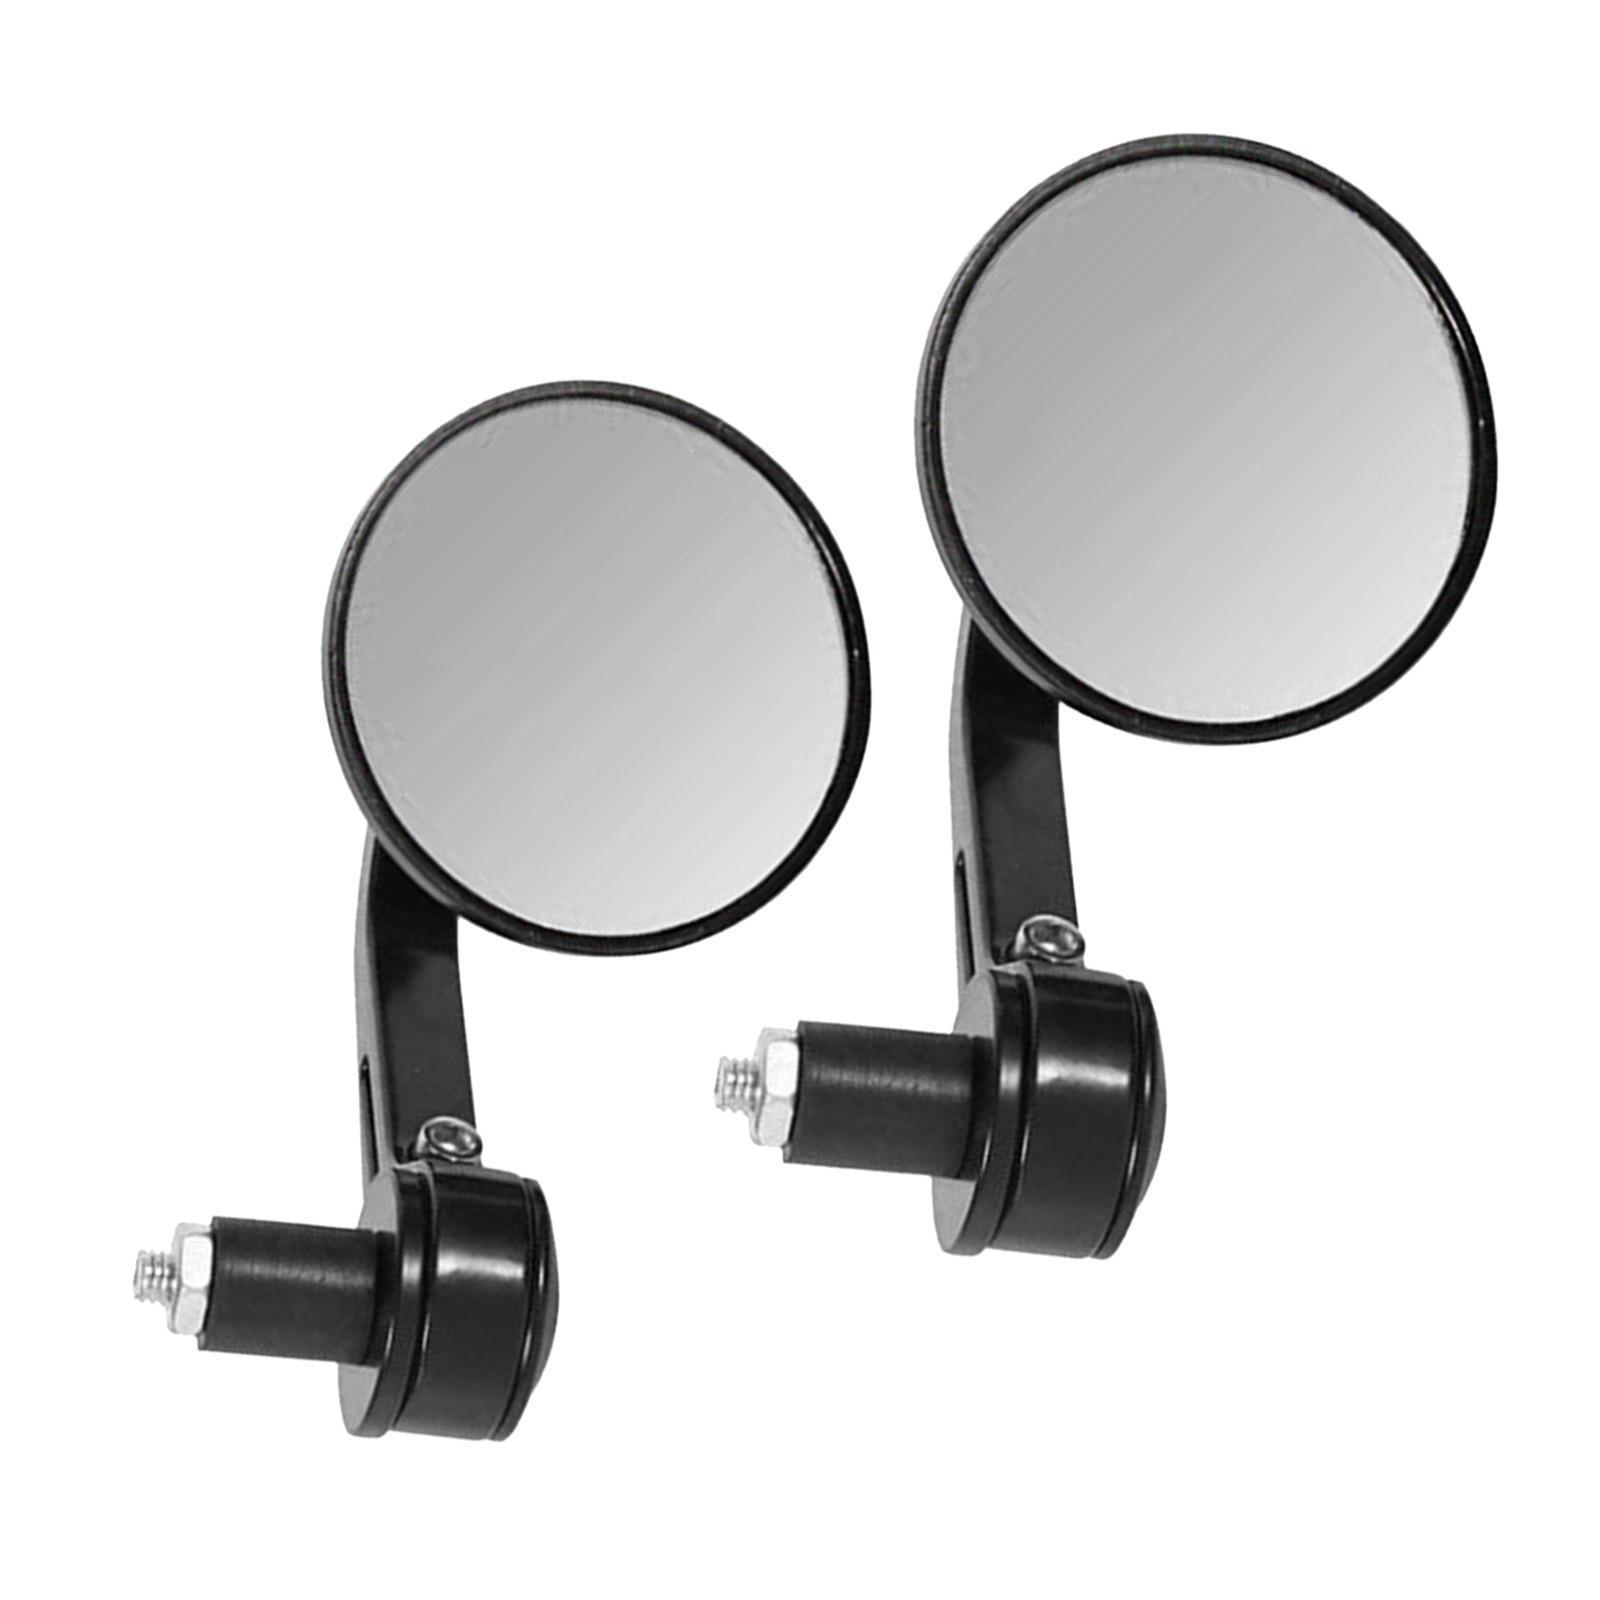 2pcs Motorcycle Rear View Mirrors Aluminum Alloy Motorbike Side View Mirrors